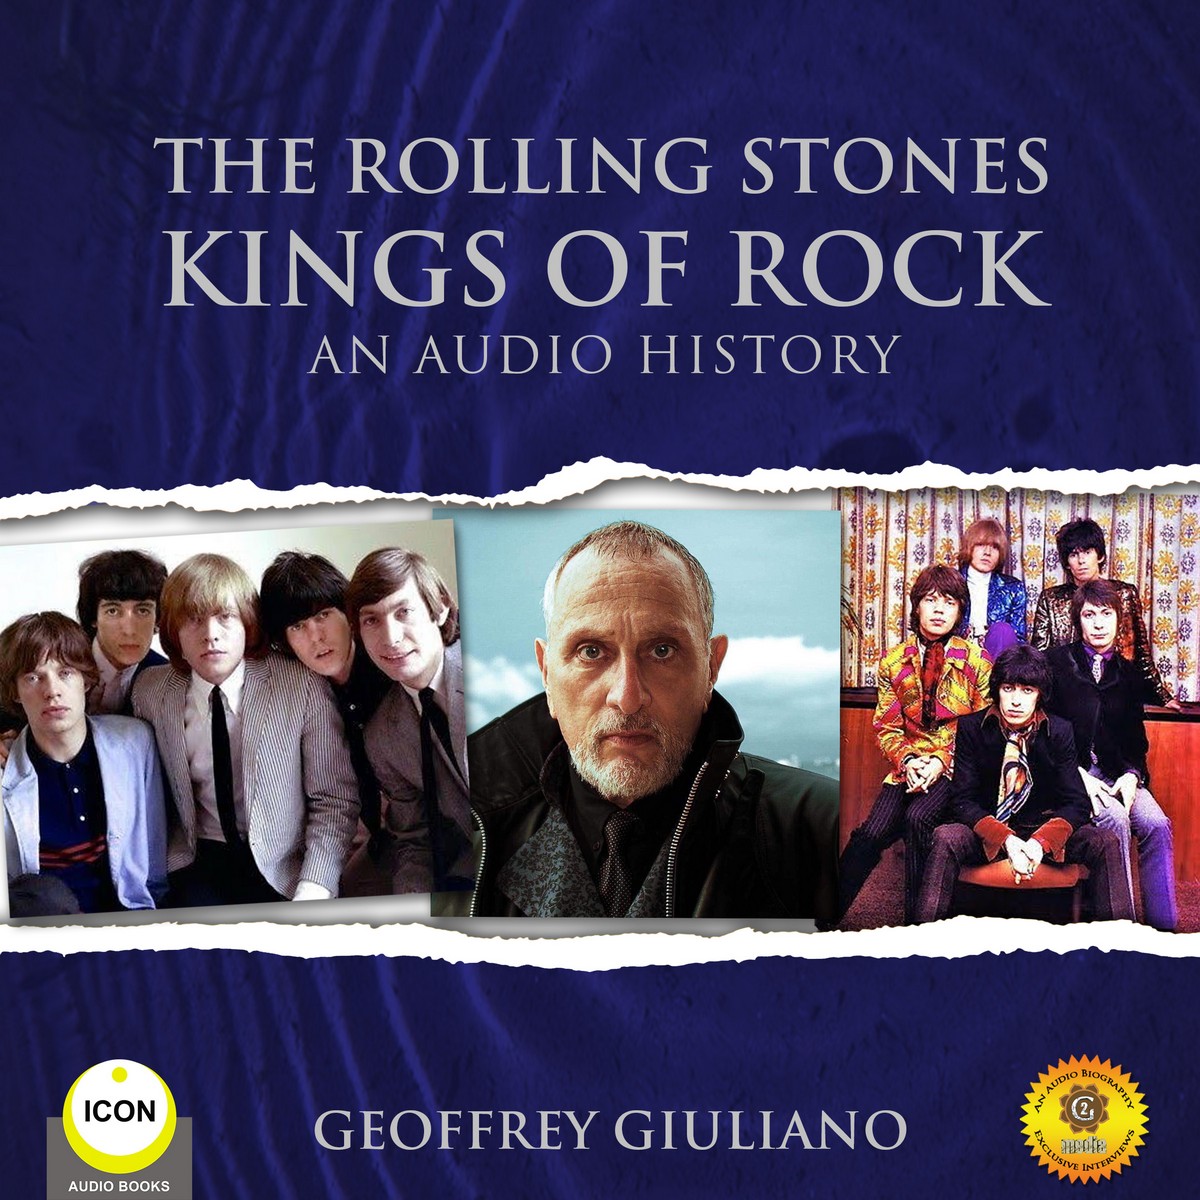 The Rolling Stones Kings of Rock – An Audio History